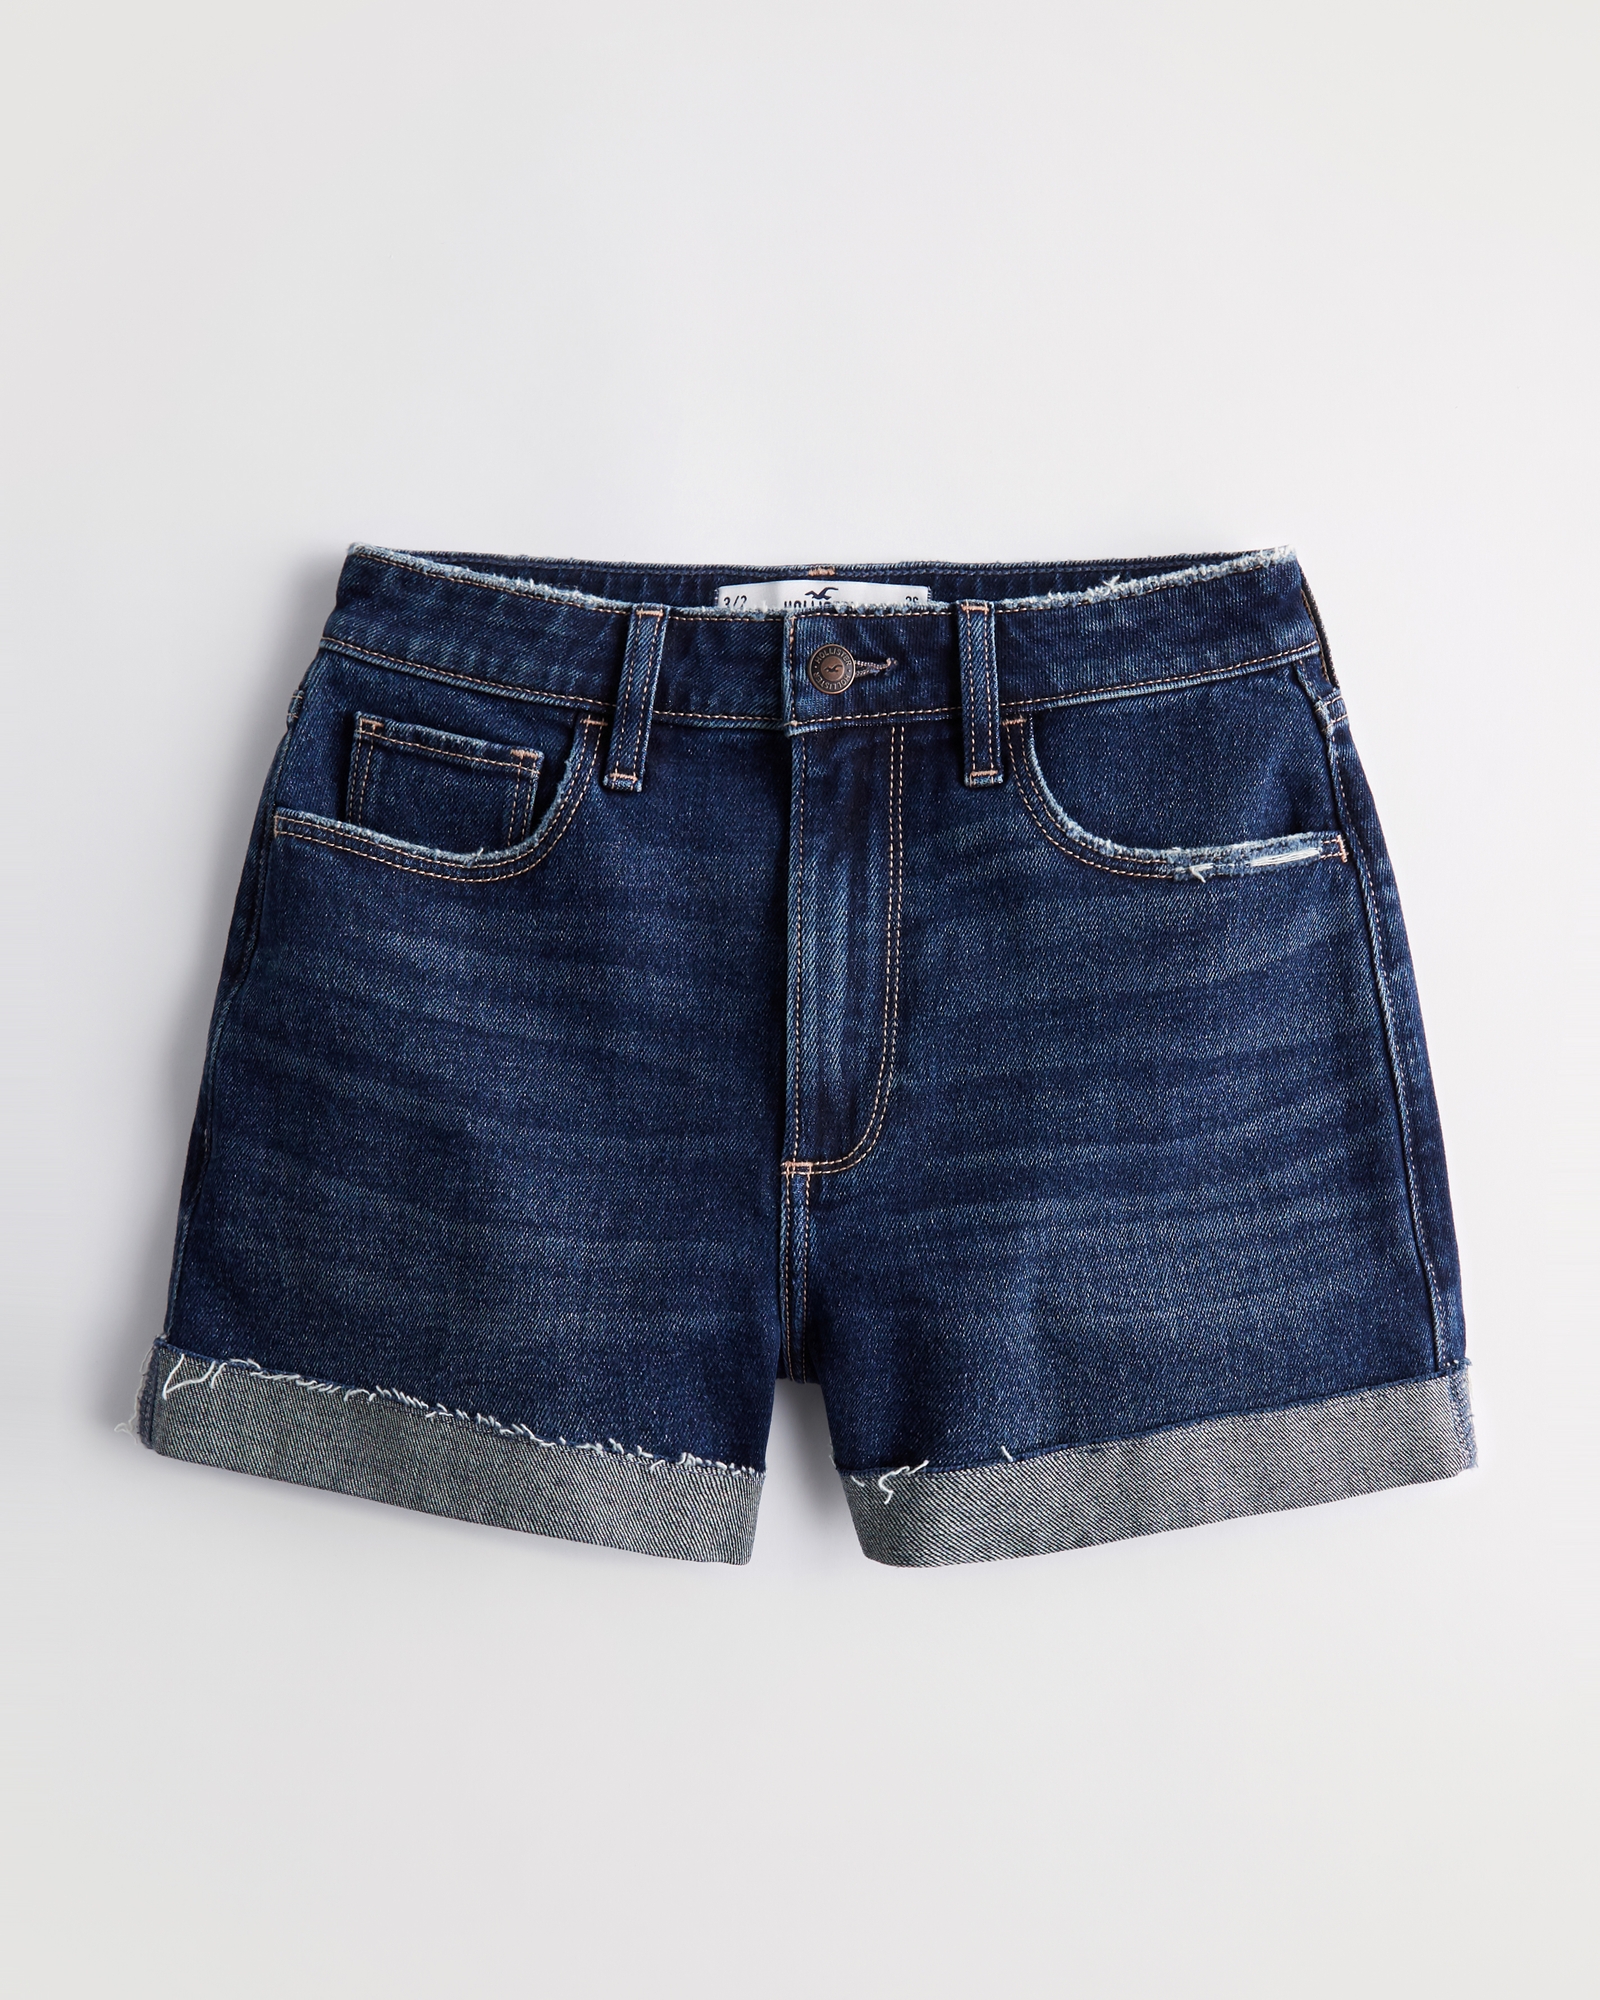 https://img.hollisterco.com/is/image/anf/KIC_349-3180-1346-276_prod1.jpg?policy=product-extra-large